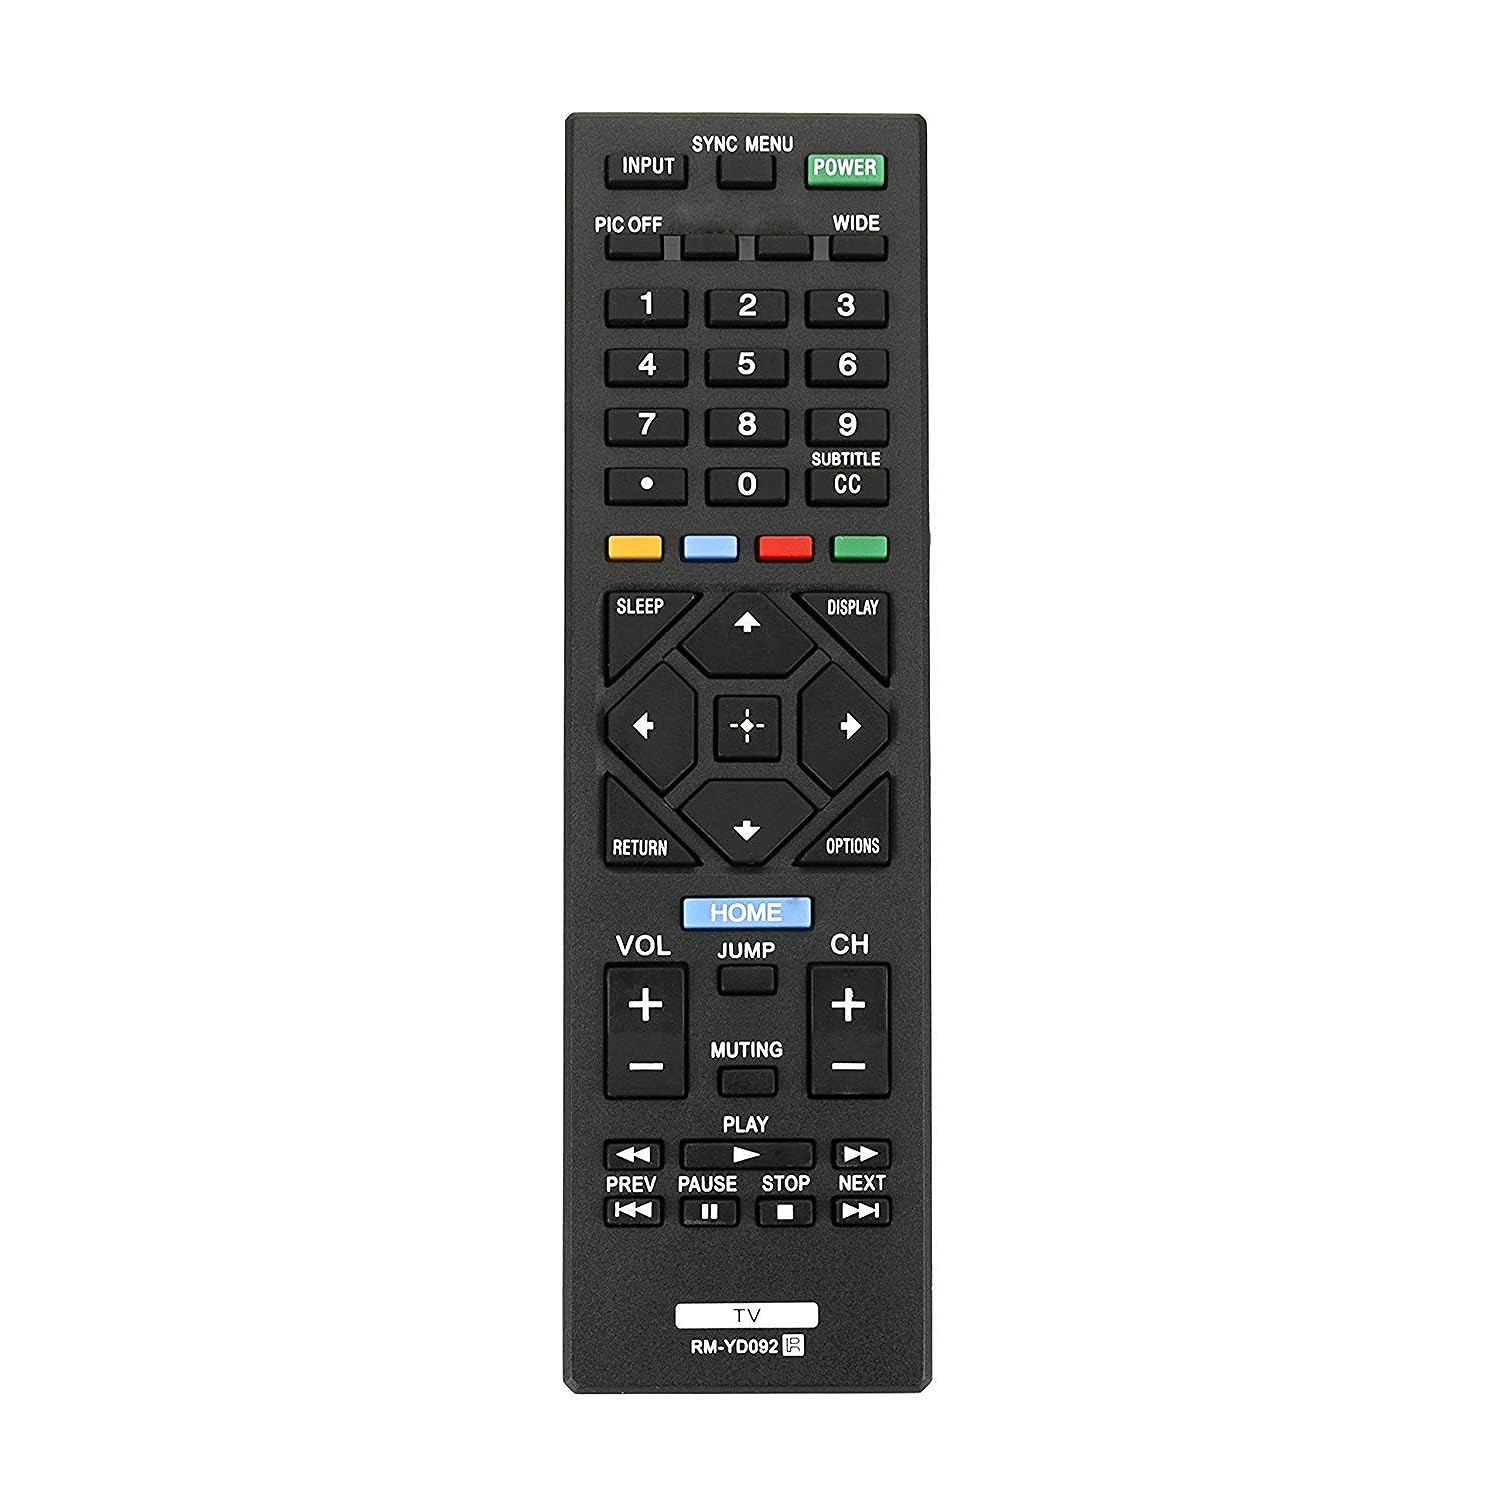 thinkstar Rm-Yd092 Remote Control Universal Compatible With All Sony Lcd Led Hdtv And Bravia Tv'S - New Model